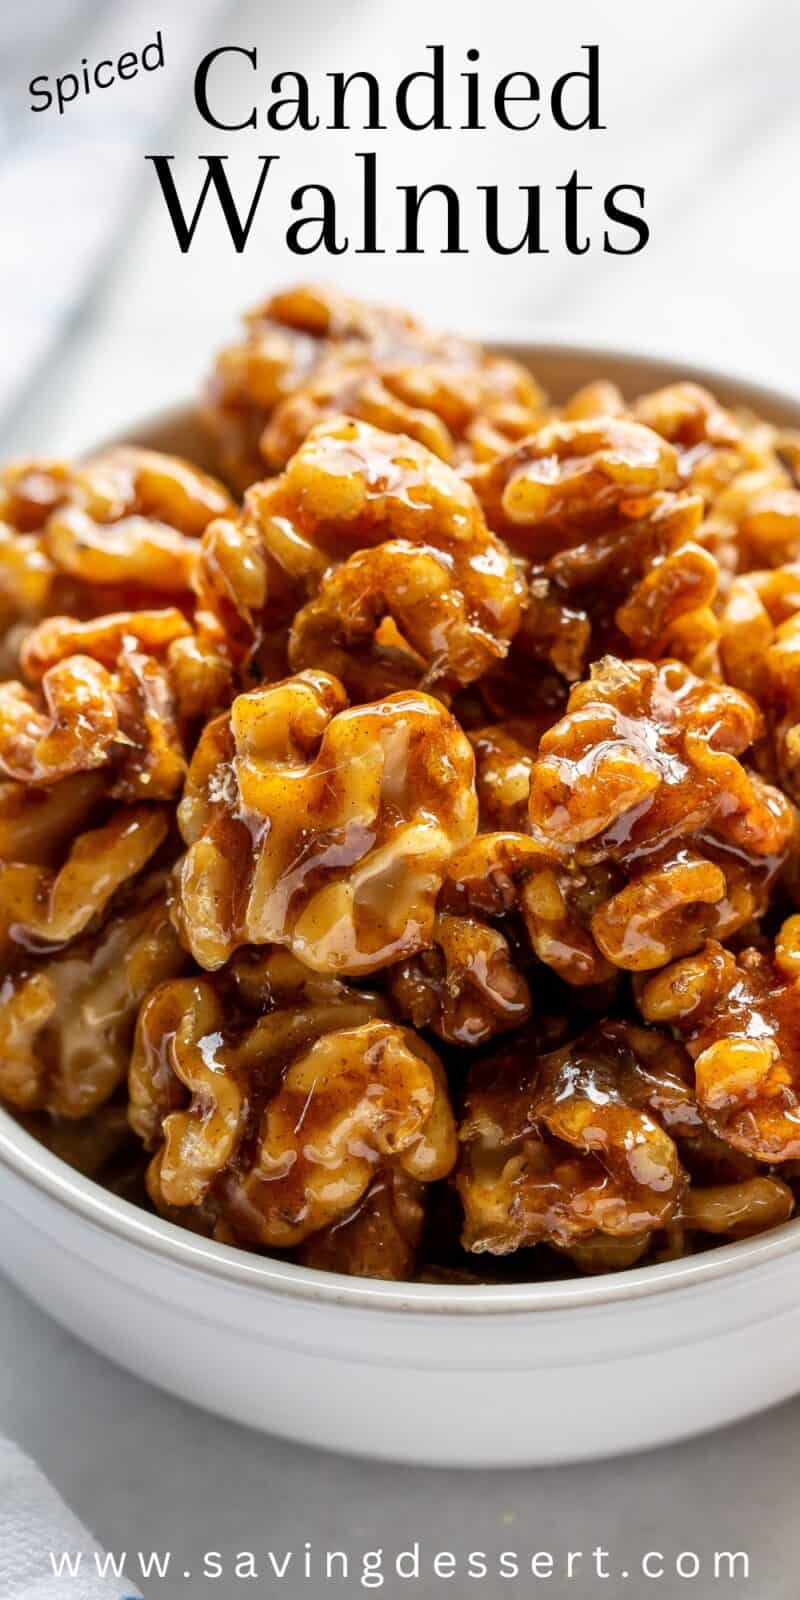 Closeup photo of a bowl of candied walnuts